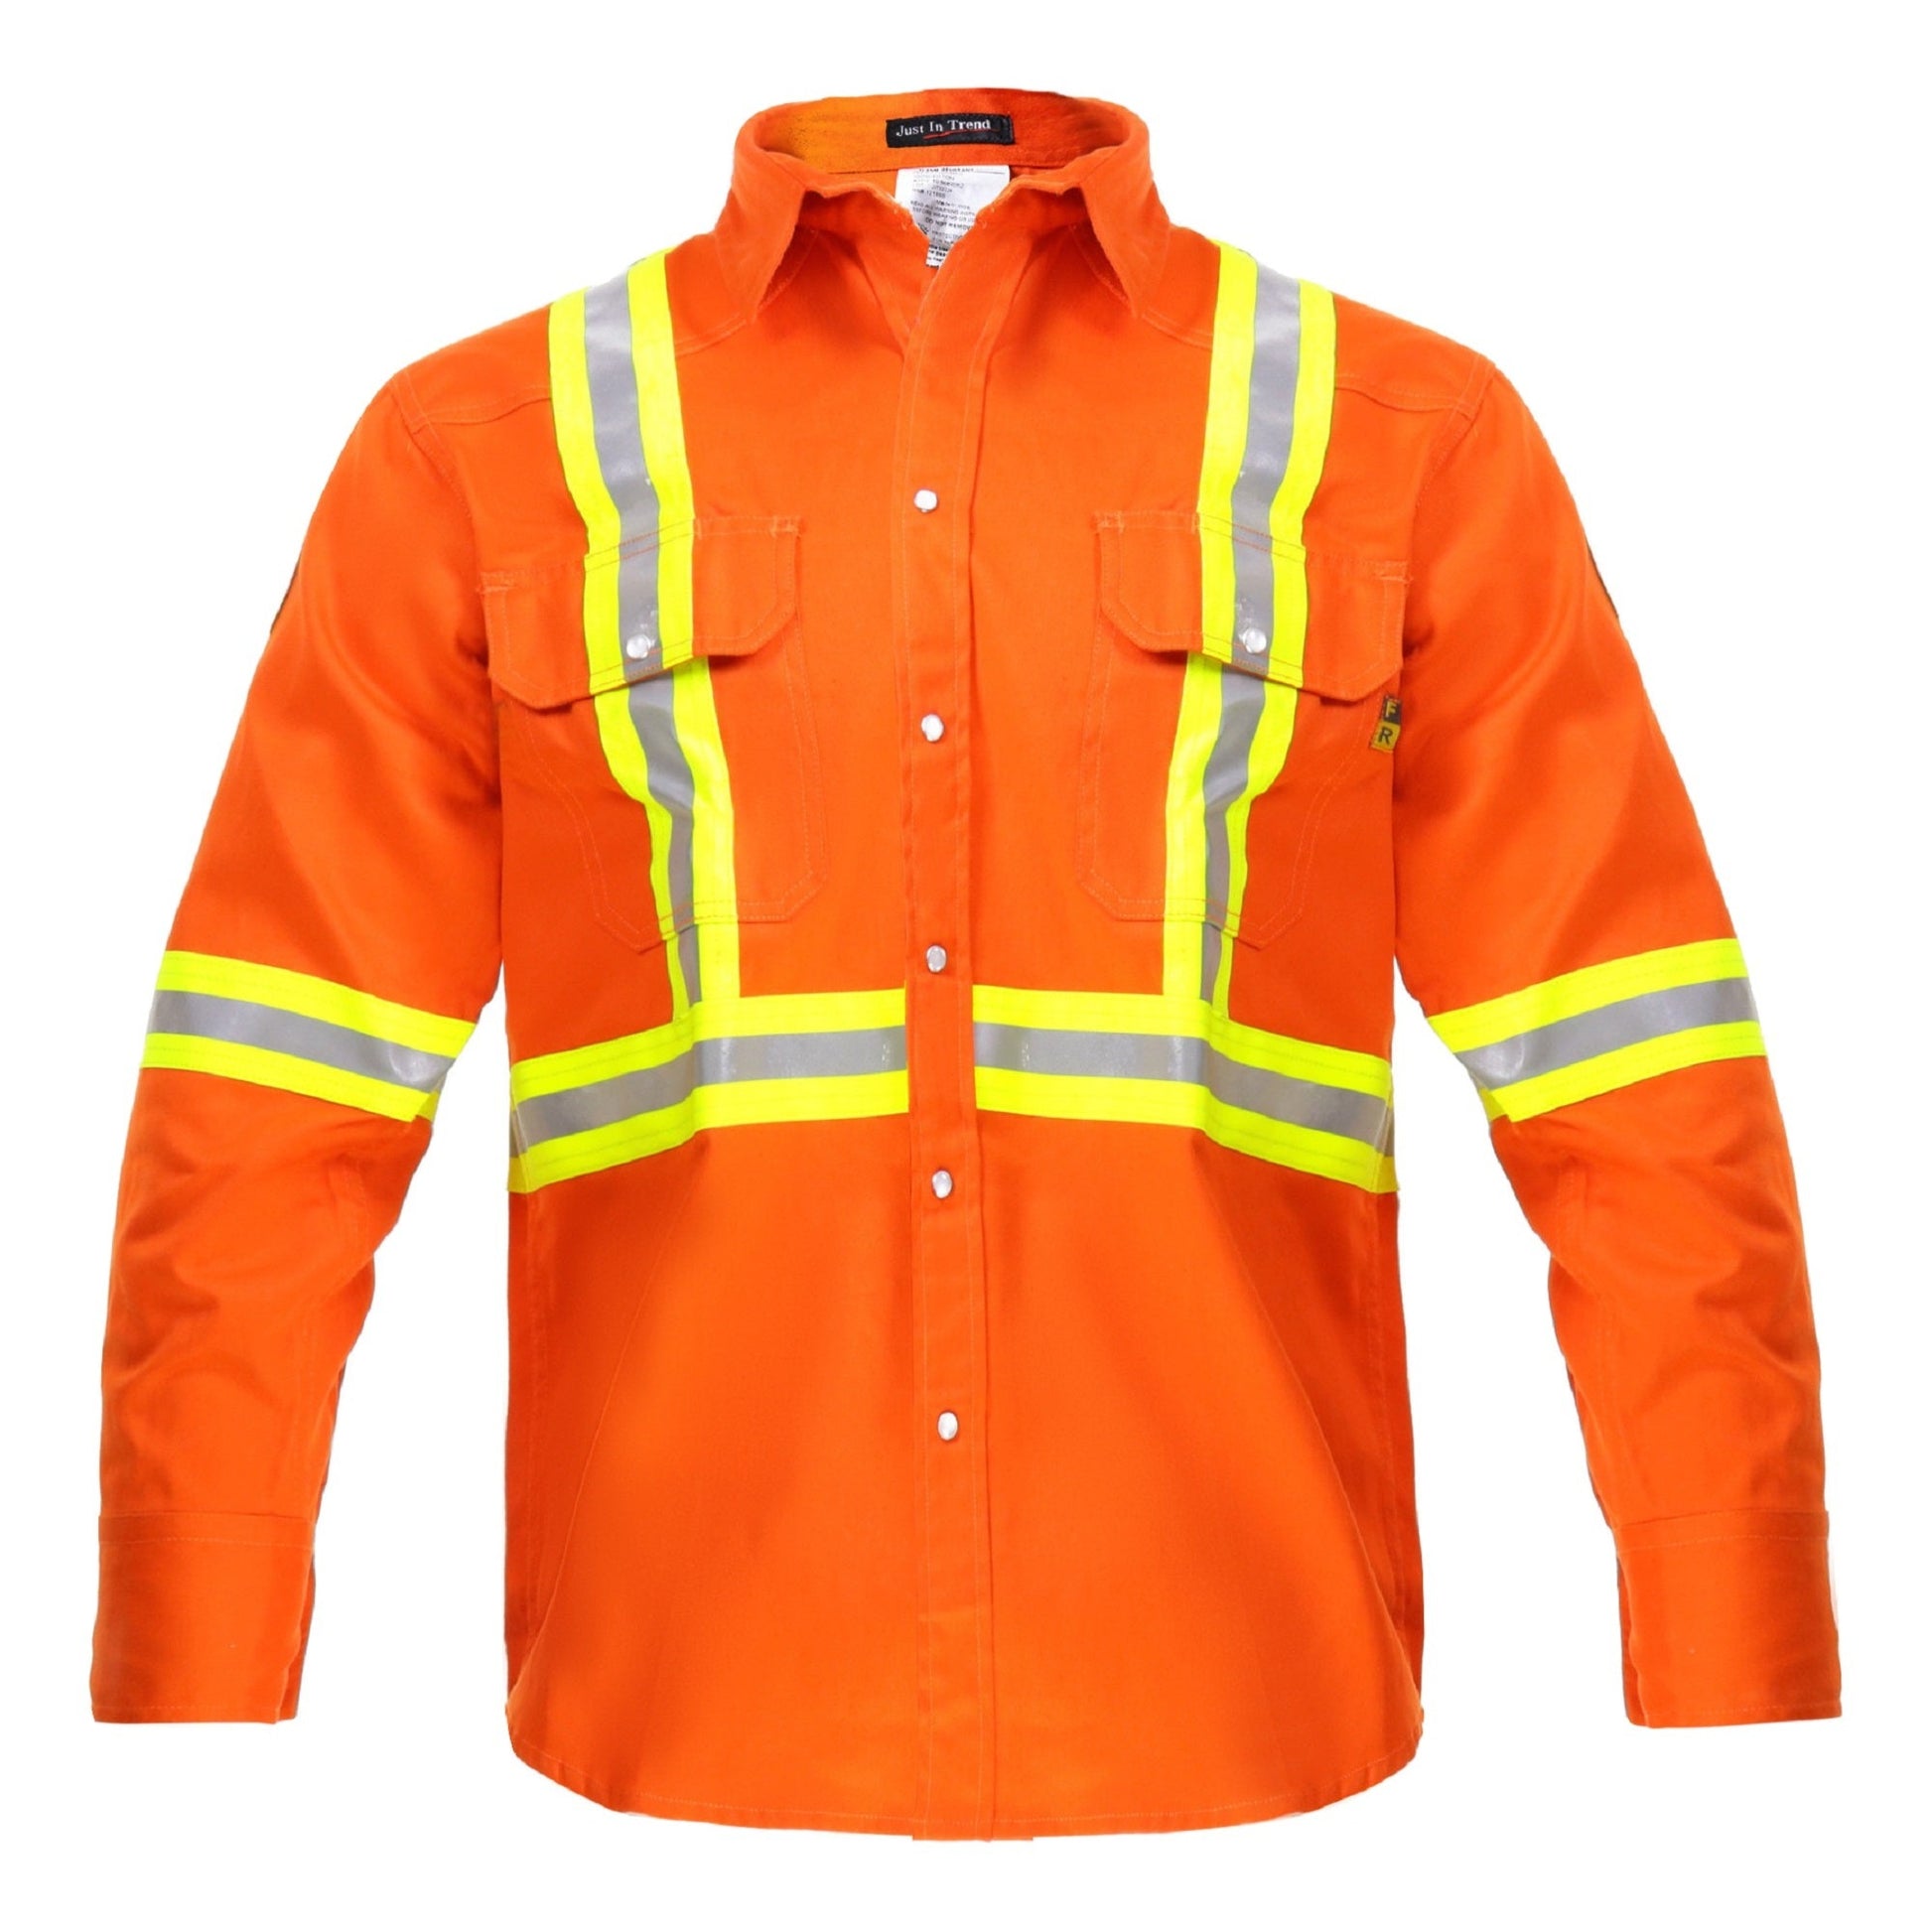  Just In Trend Iron on High Visibility Hi Vis